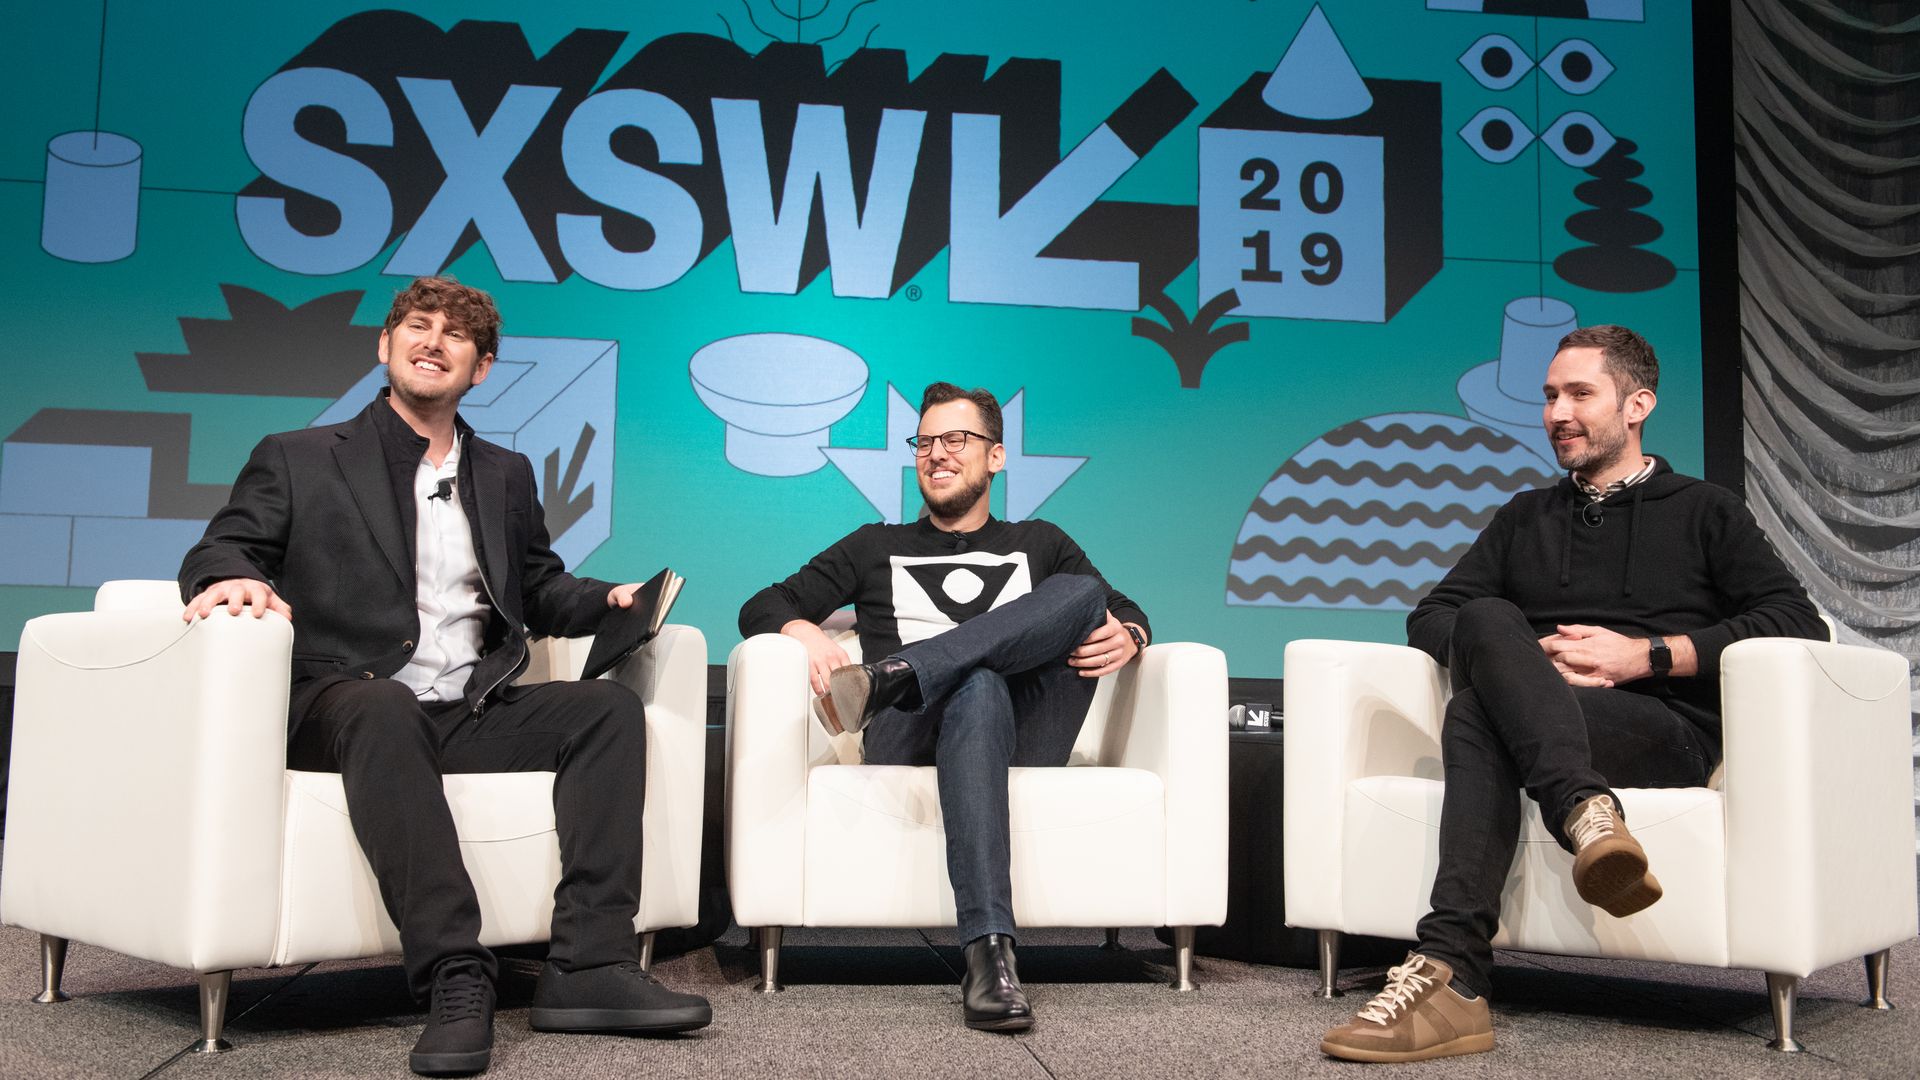 Tech Crunch editor-at-large Josh Constine (L) interviews Instagram co-founders Mike Krieger (C) and Kevin Systrom live on stage during the 2019 SXSW Conference 